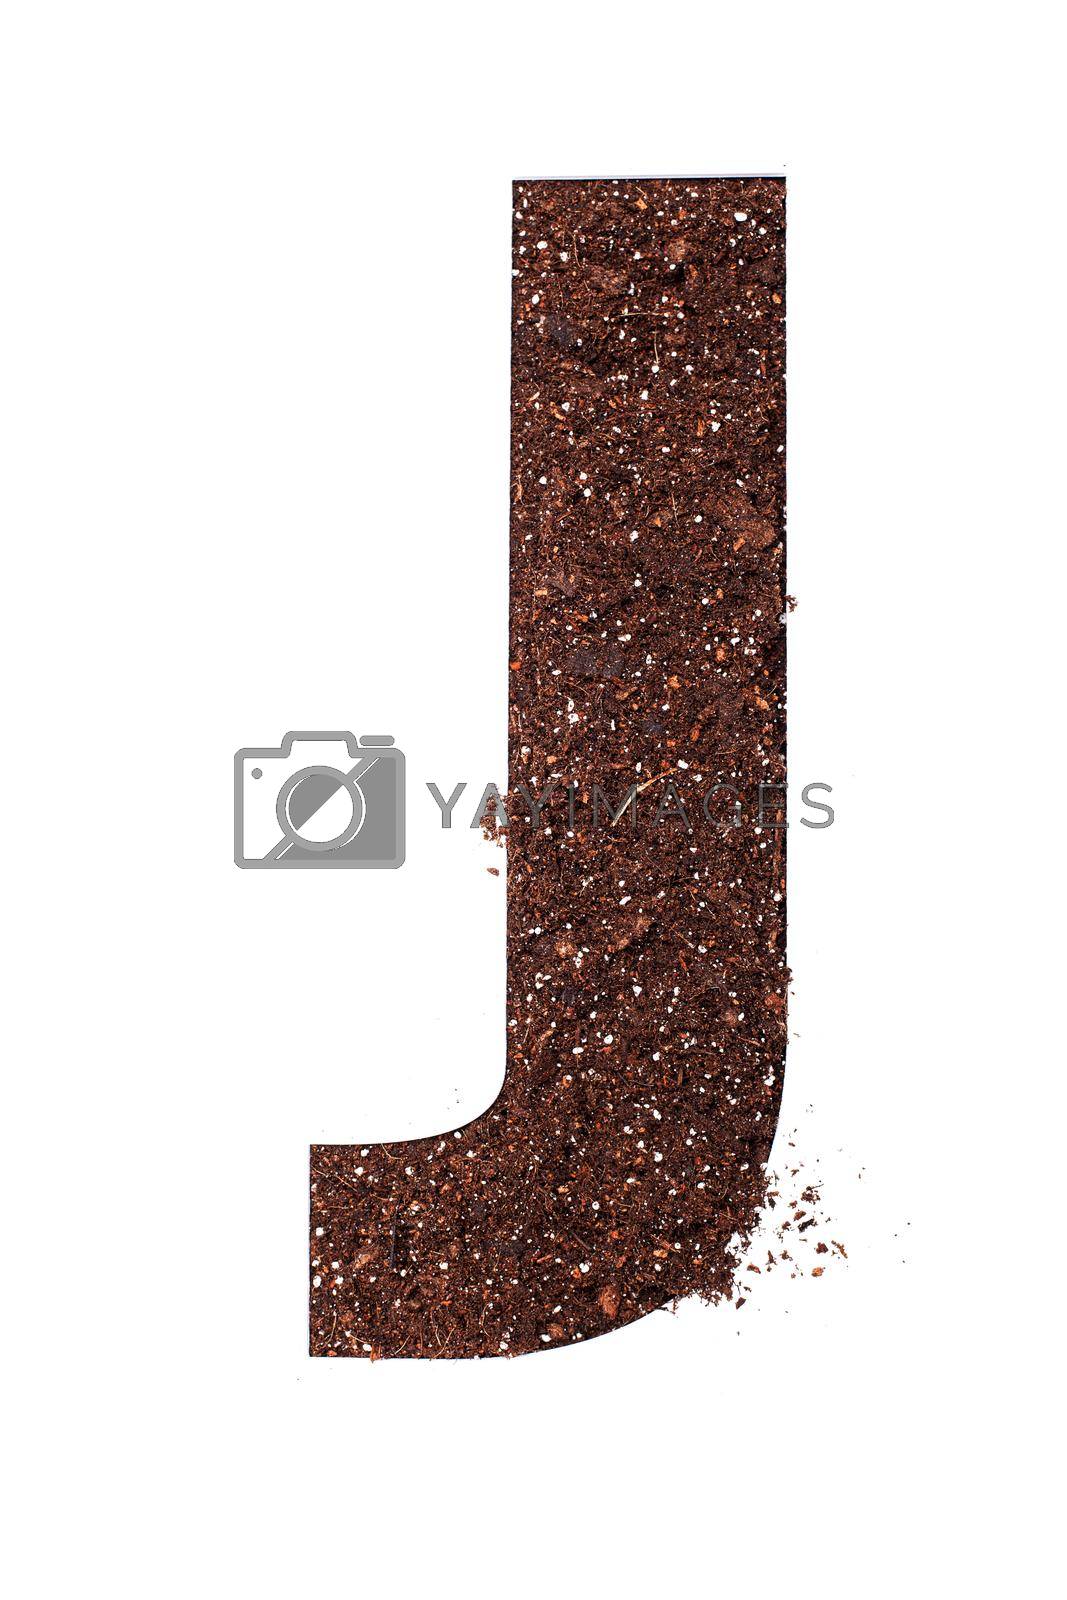 Royalty free image of stencil letter J made above dirt on white surface by kokimk